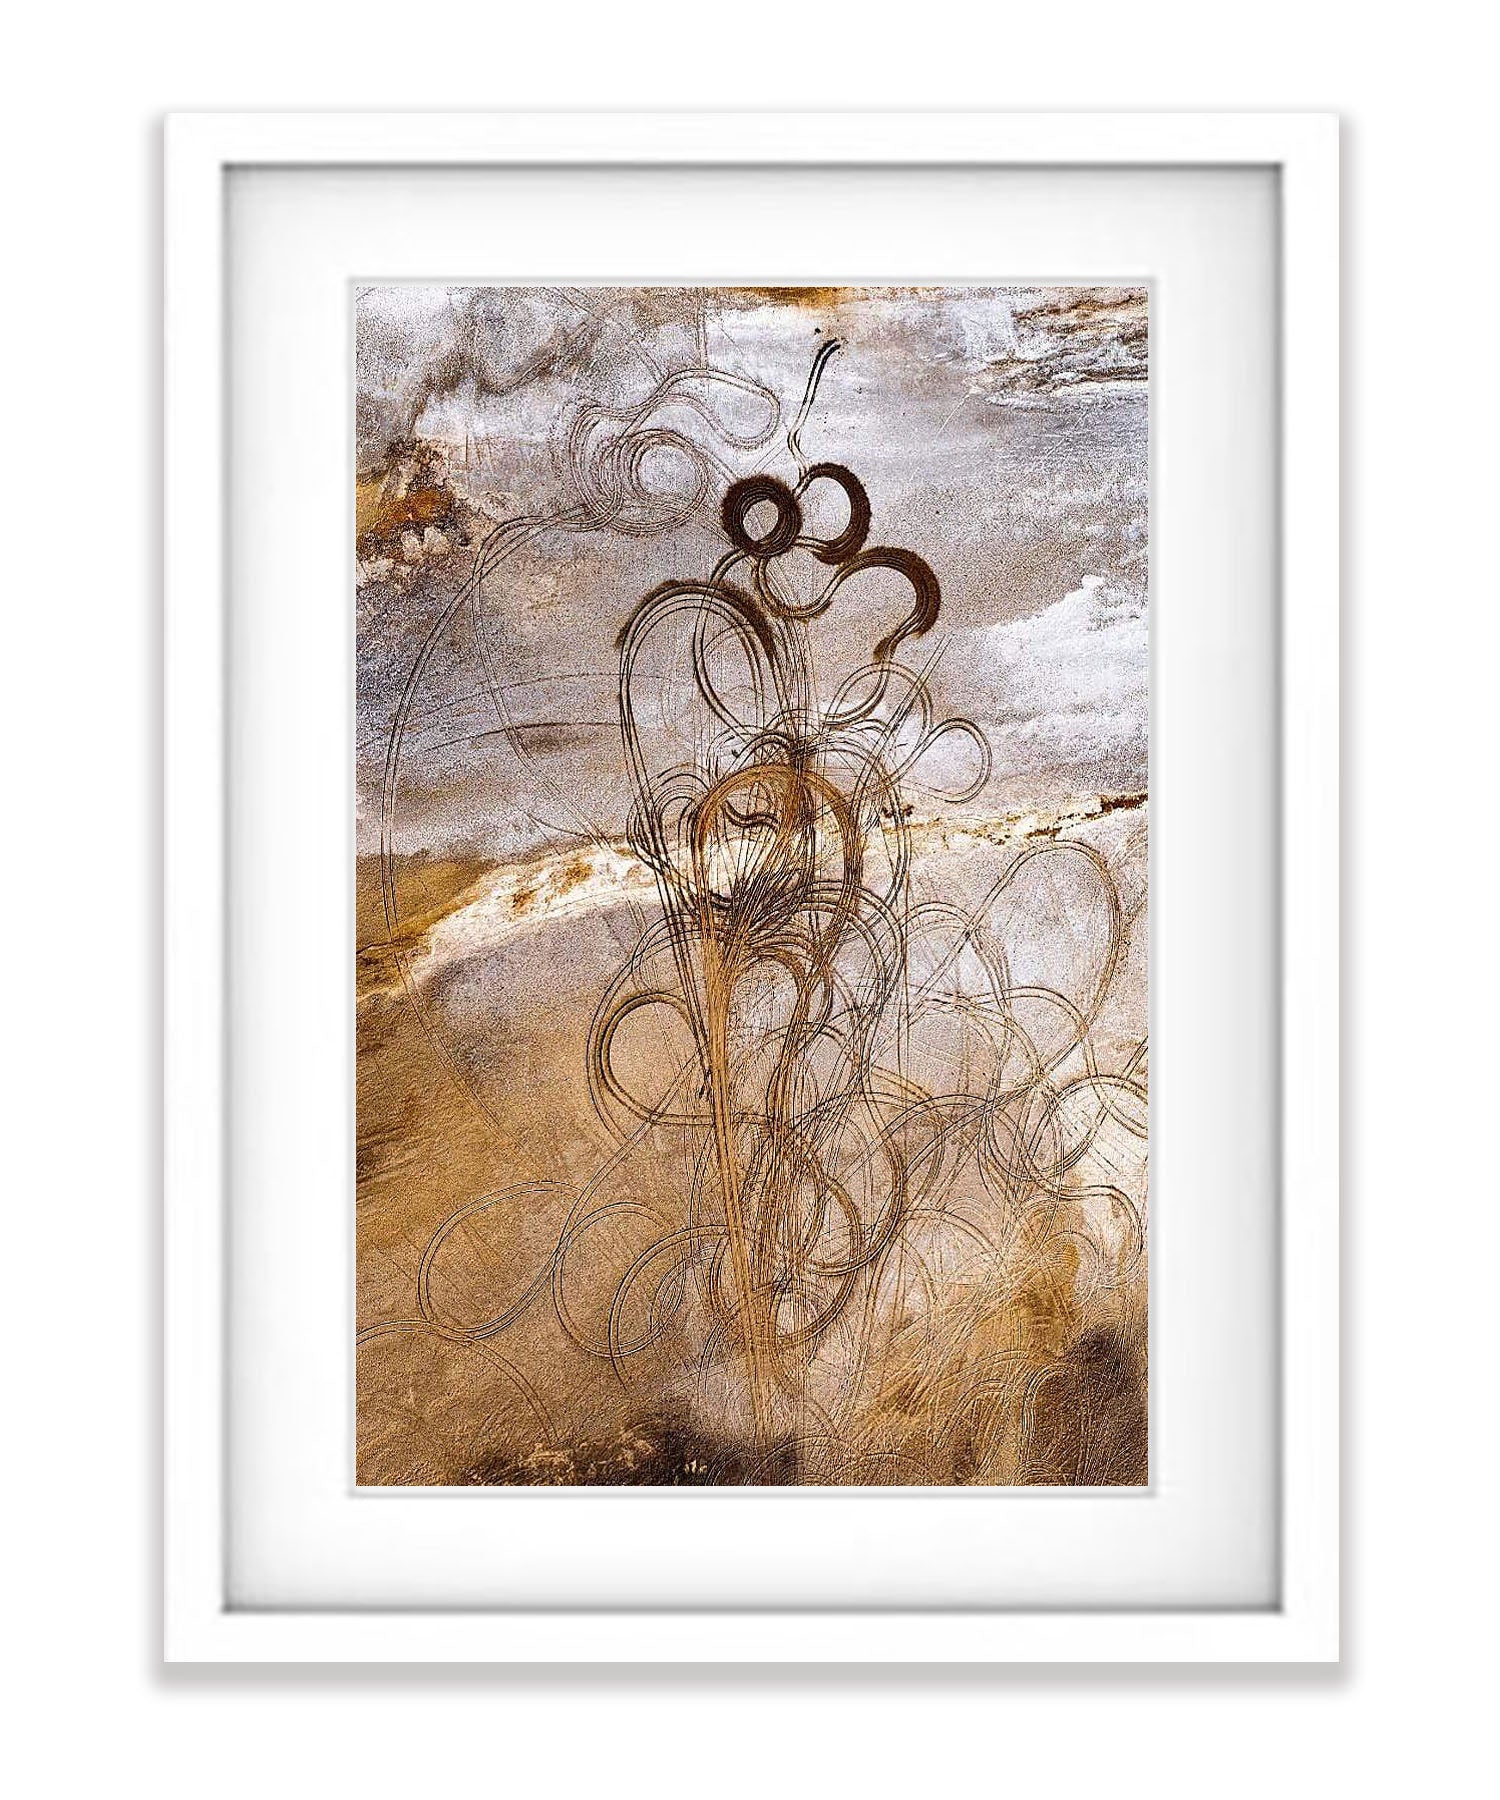 ARTWORK INSTOCK - 'Circle Work' - Available 150 x 120cms mounted print (ready to frame) in the gallery TODAY!